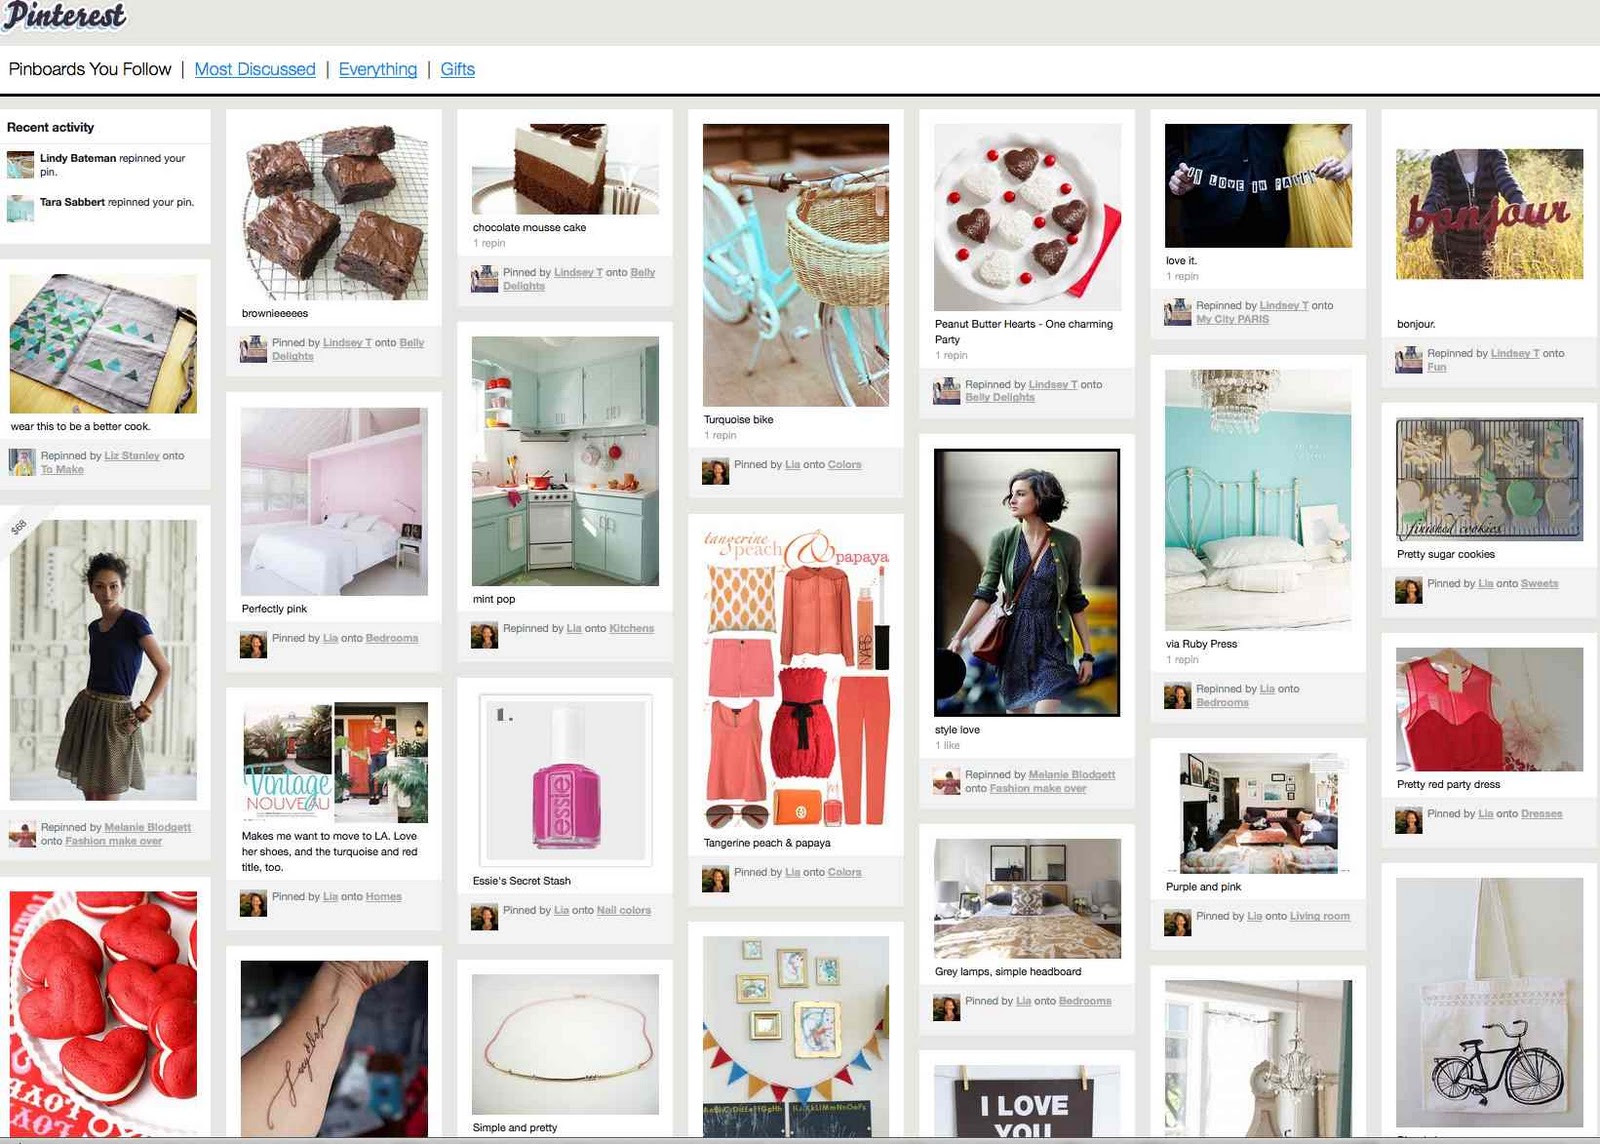 Luscious Links: Free Resources for Effective Pinterest Marketing